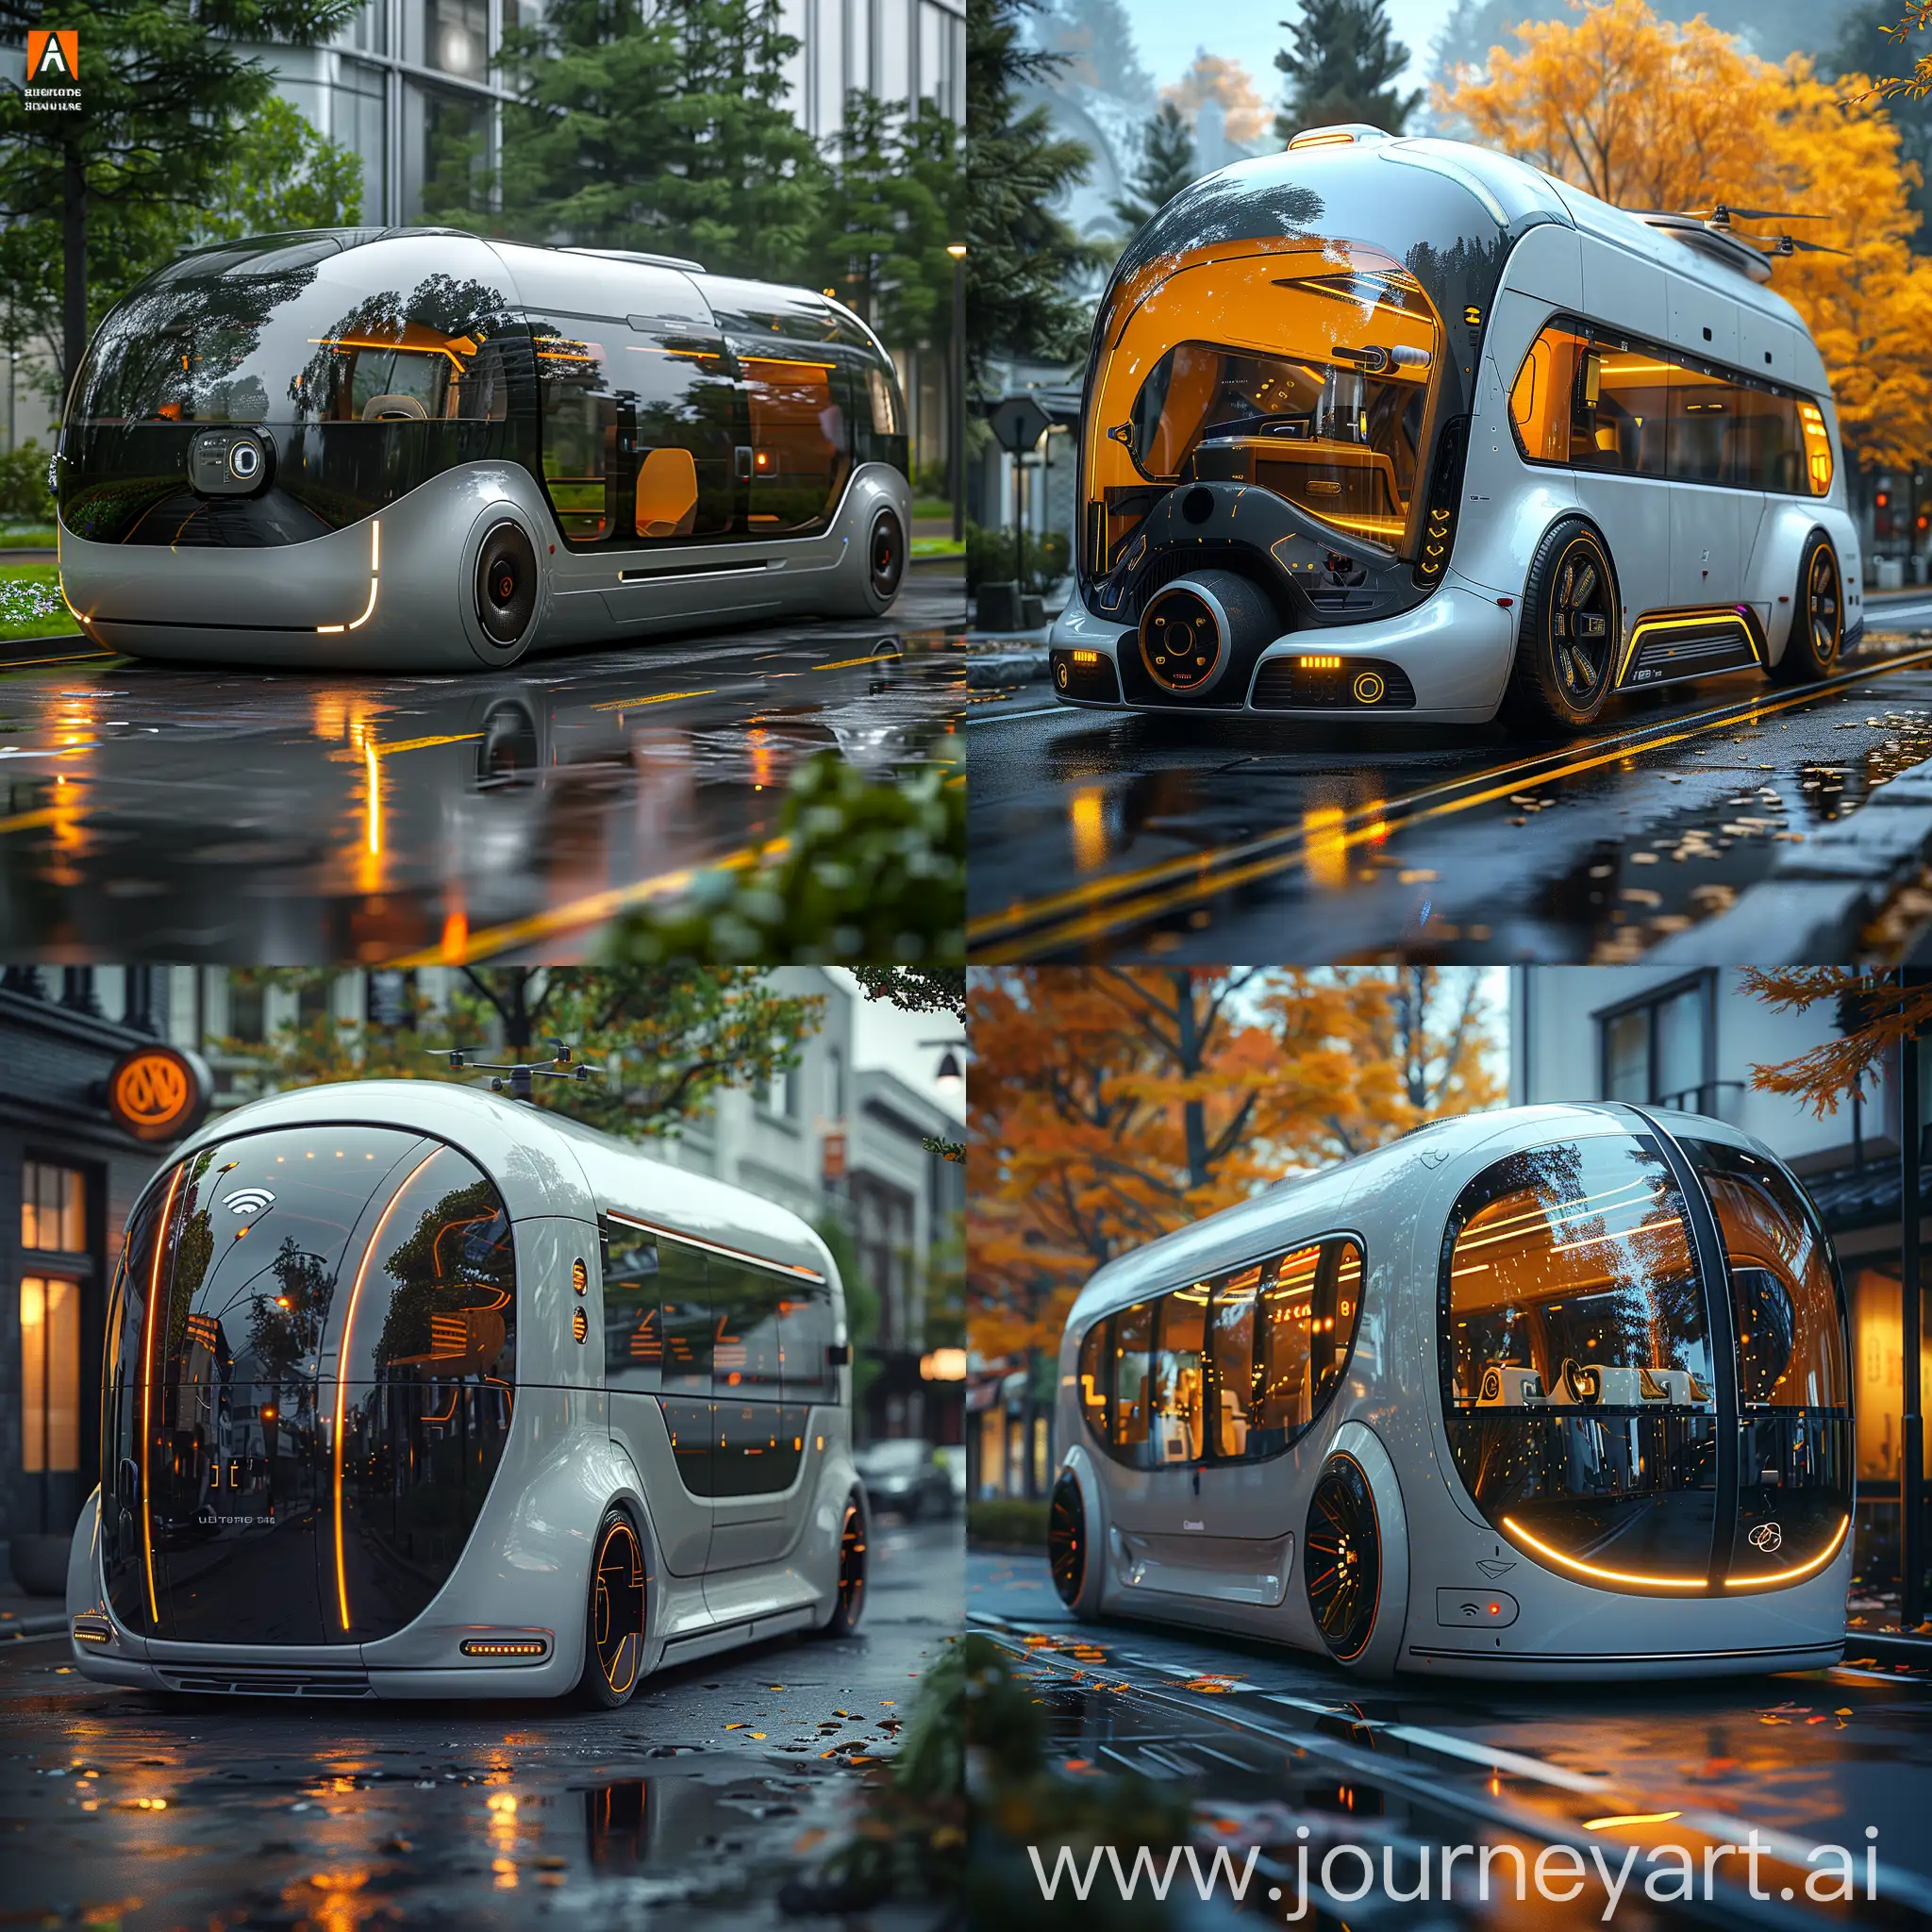 Futuristic-SelfDriving-Microbus-with-Modular-Design-and-AI-Assistant